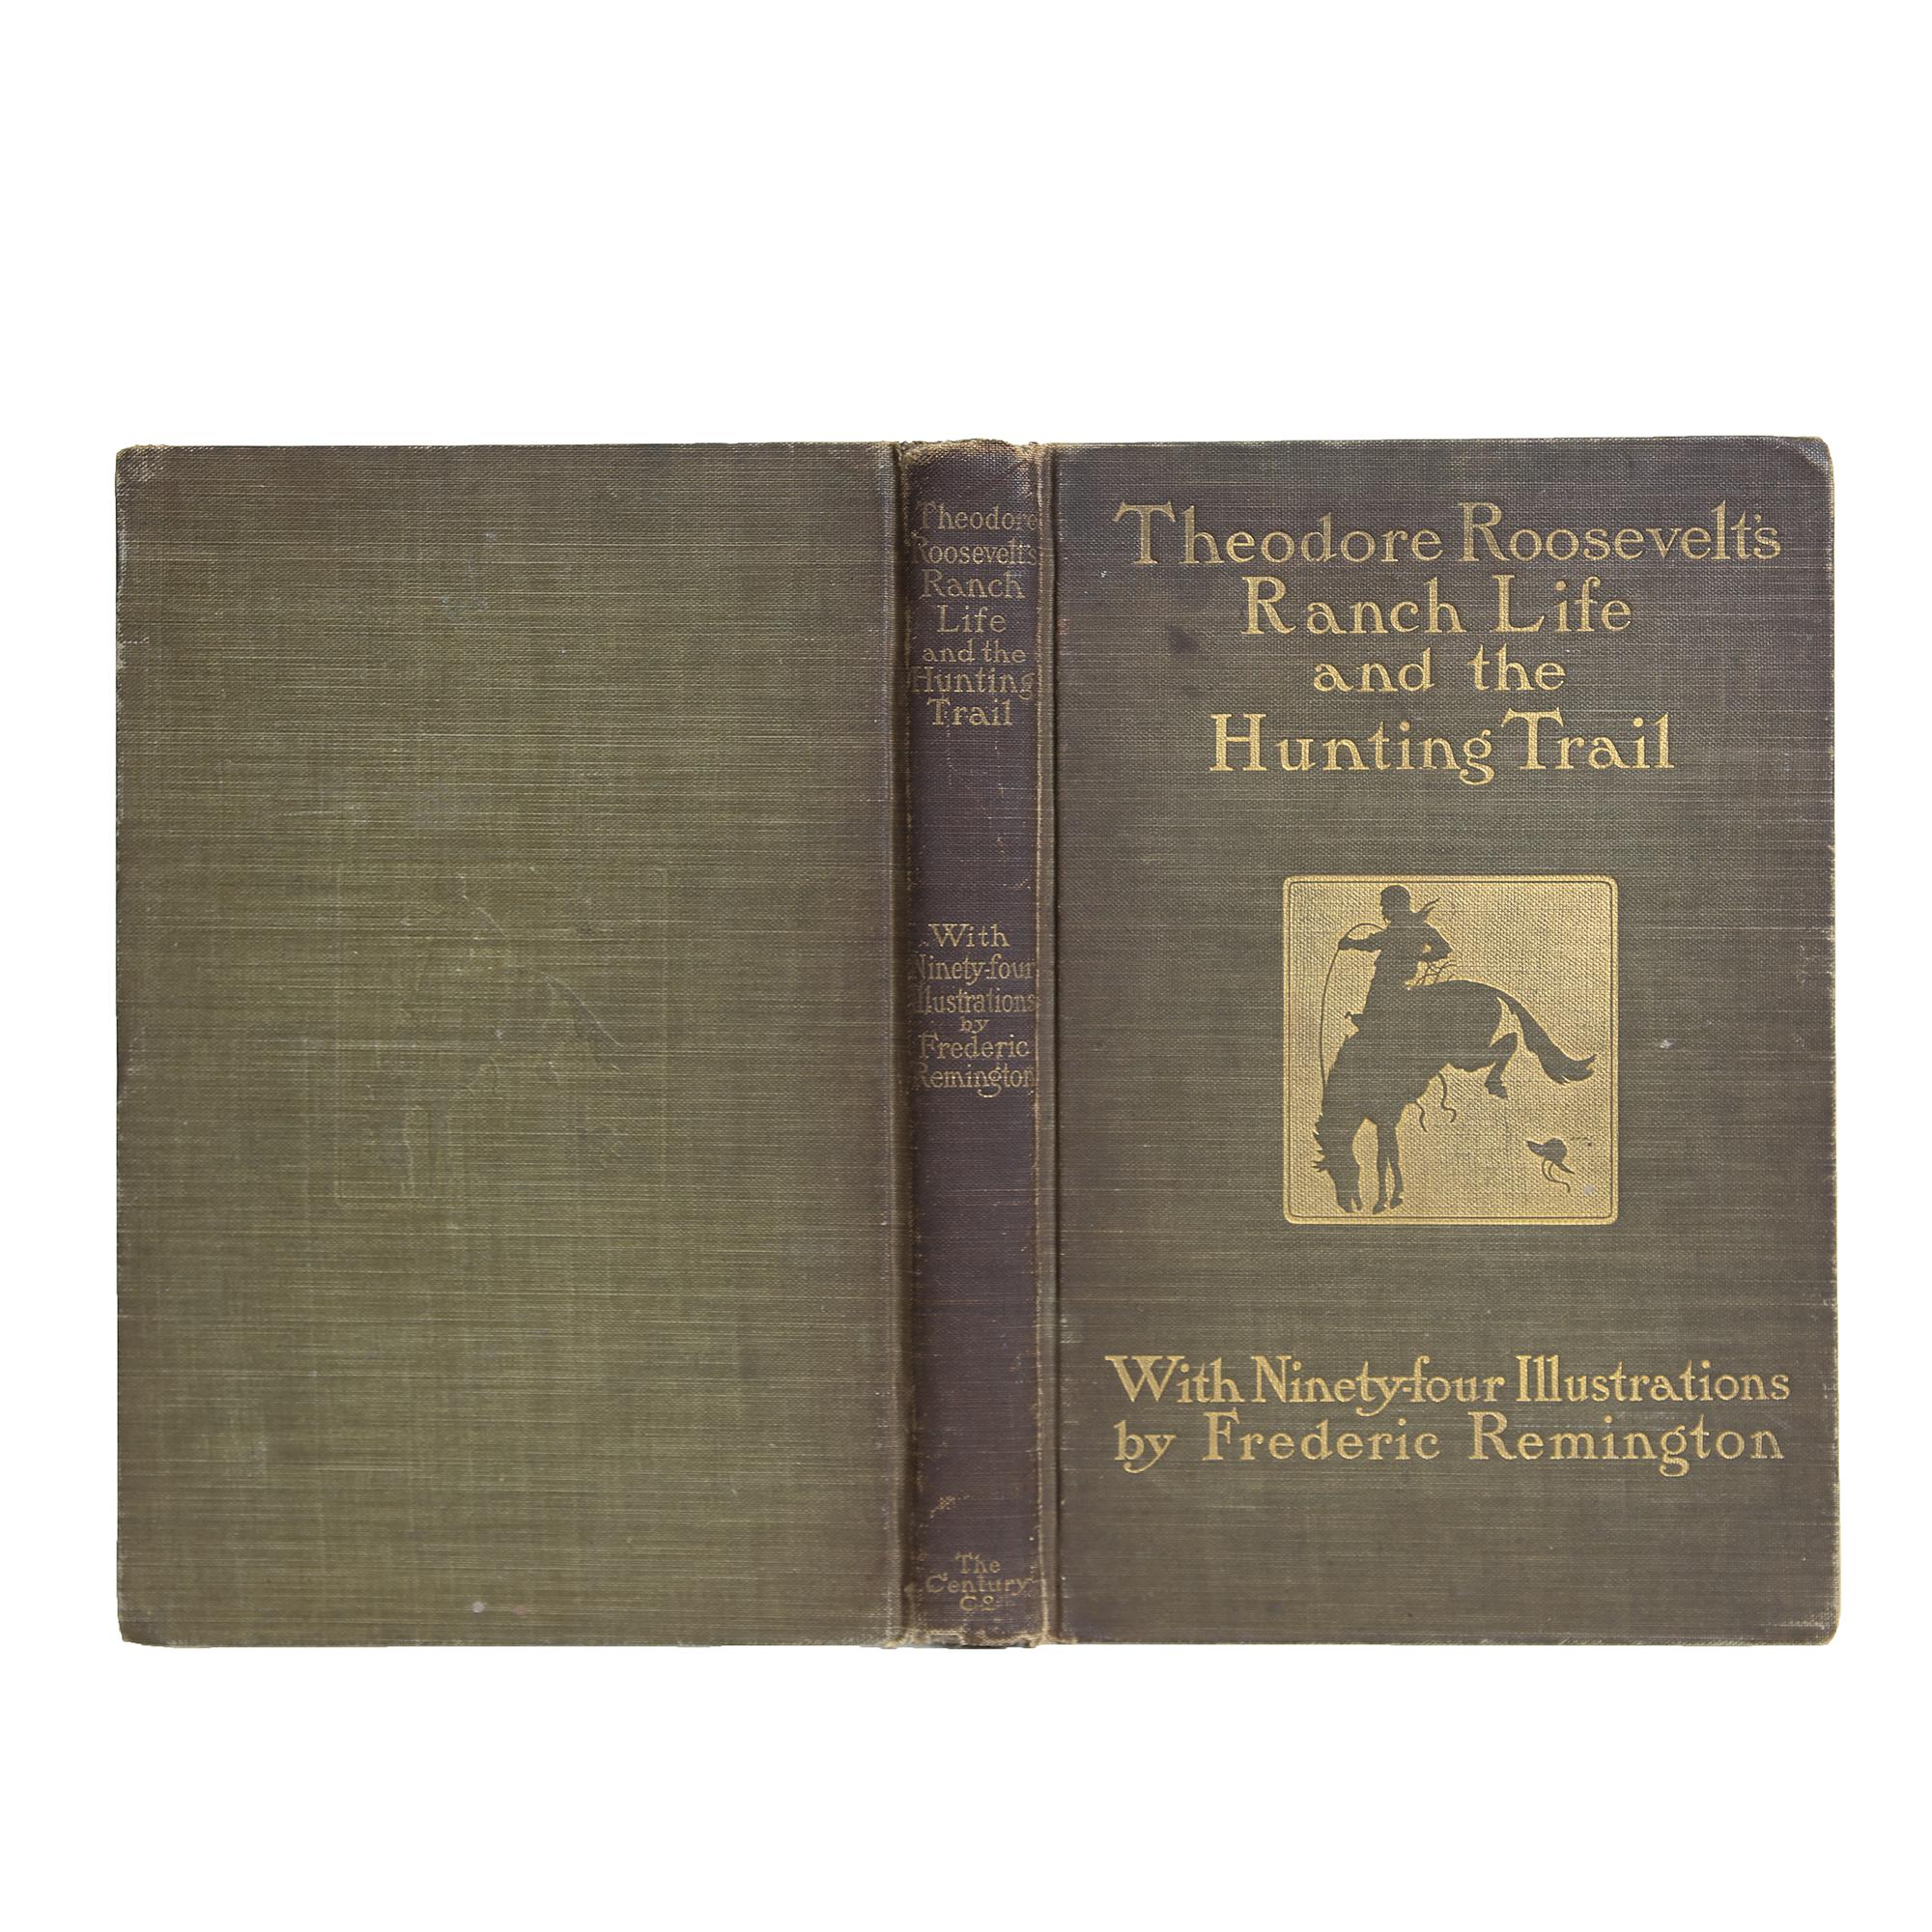 Roosevelt's Ranch Life and the Hunting Trail, Illustrated by Frederic Remington  5